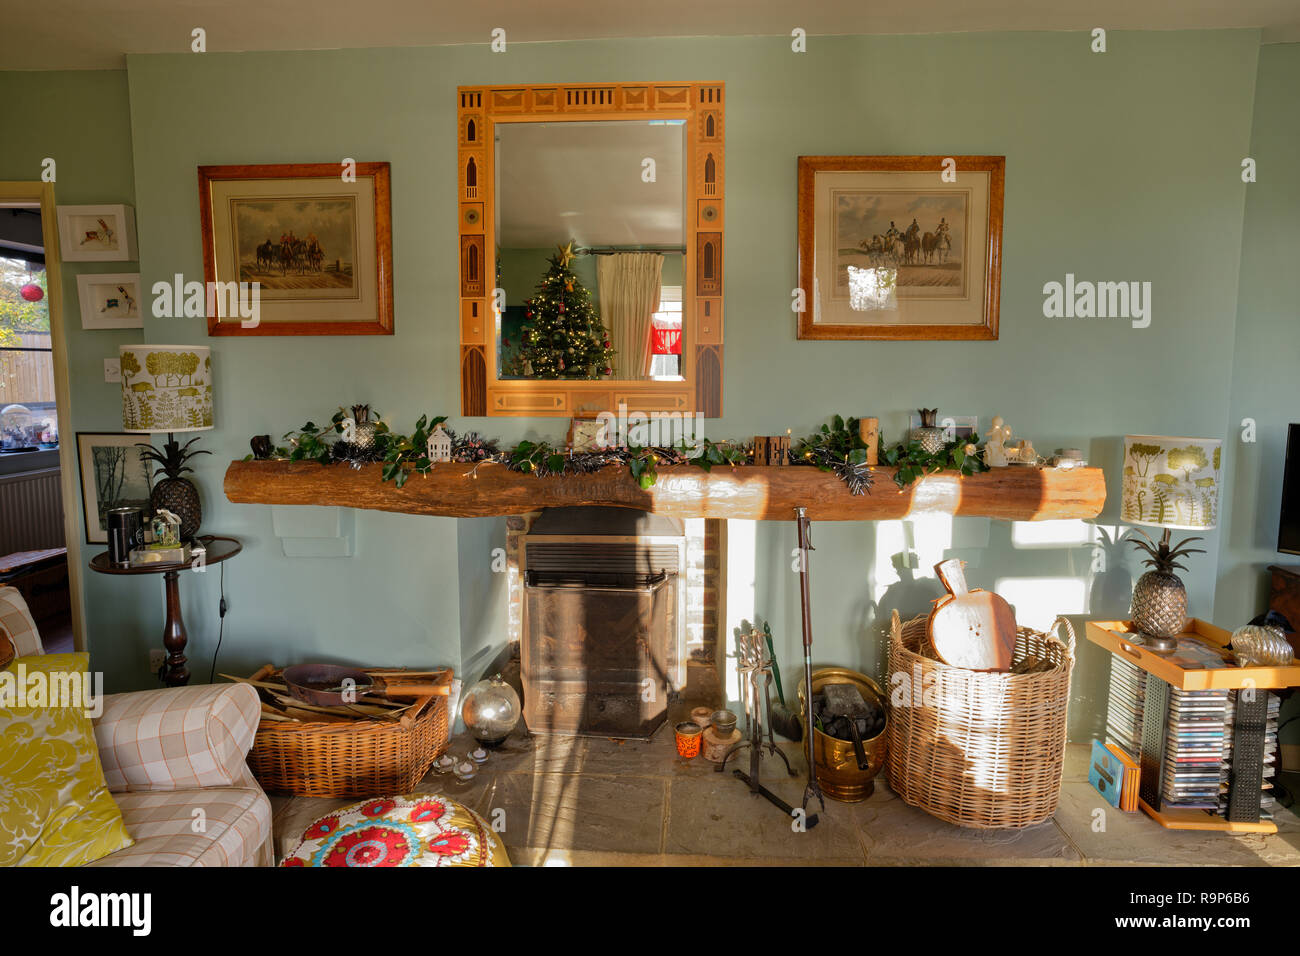 English drawing room at Christmas. Fireplace and decorated mantlepiece. Stock Photo